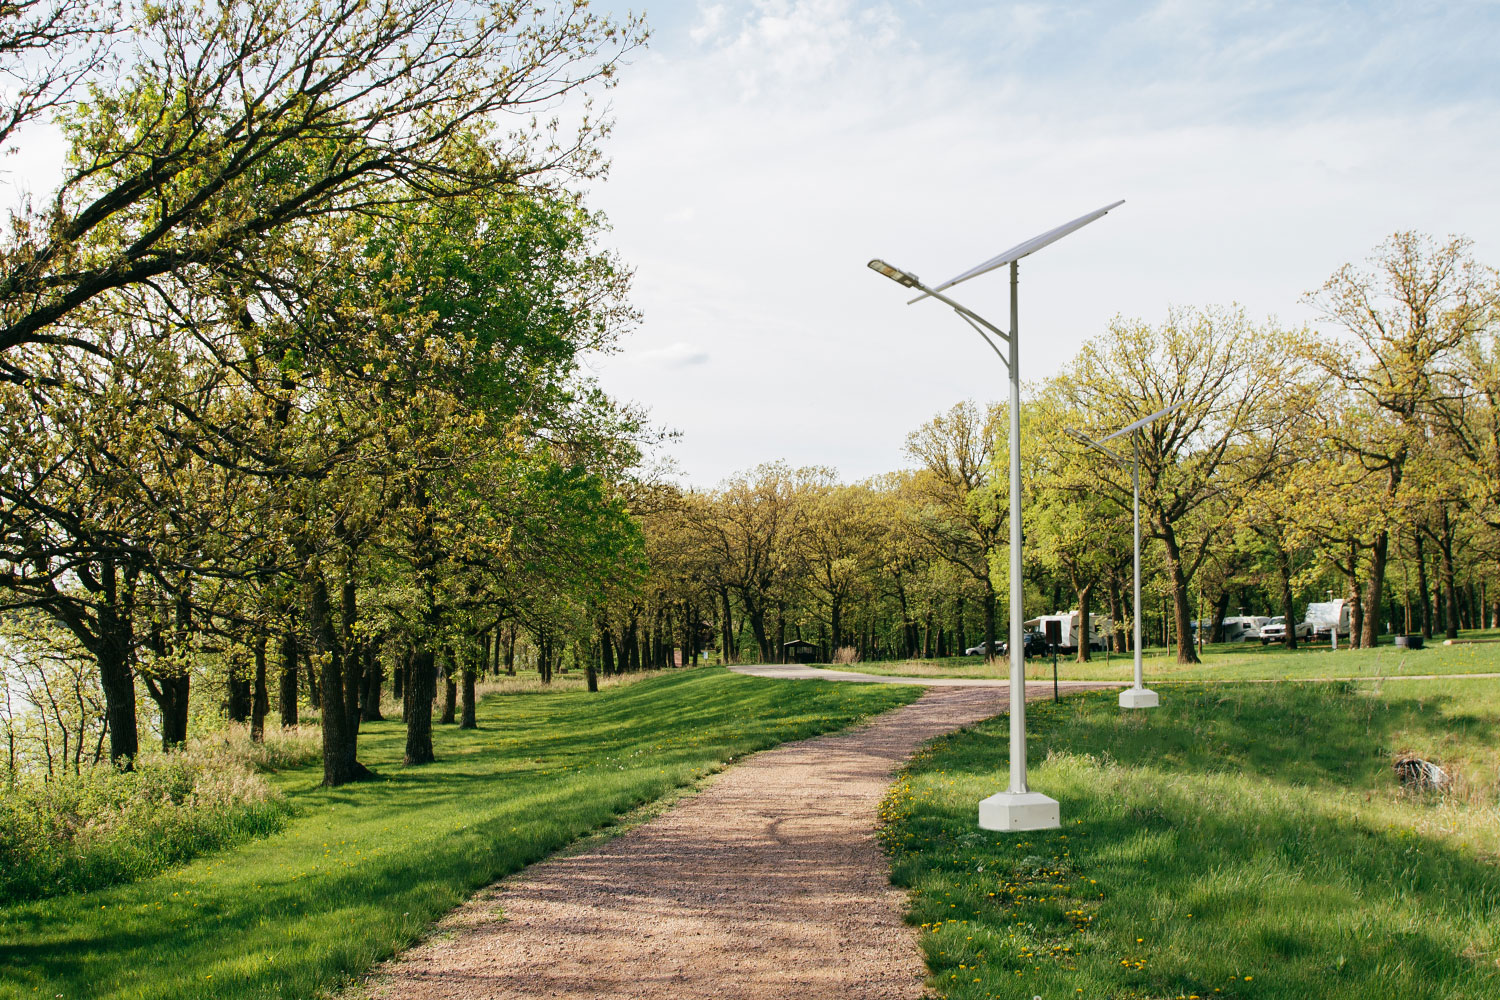 Solar street lights from GreenBright Design Build offer a stand-alone, off-grid system perfect for residential and commercial street lighting, rural areas, playgrounds, pathways, marinas, nature trails and more!